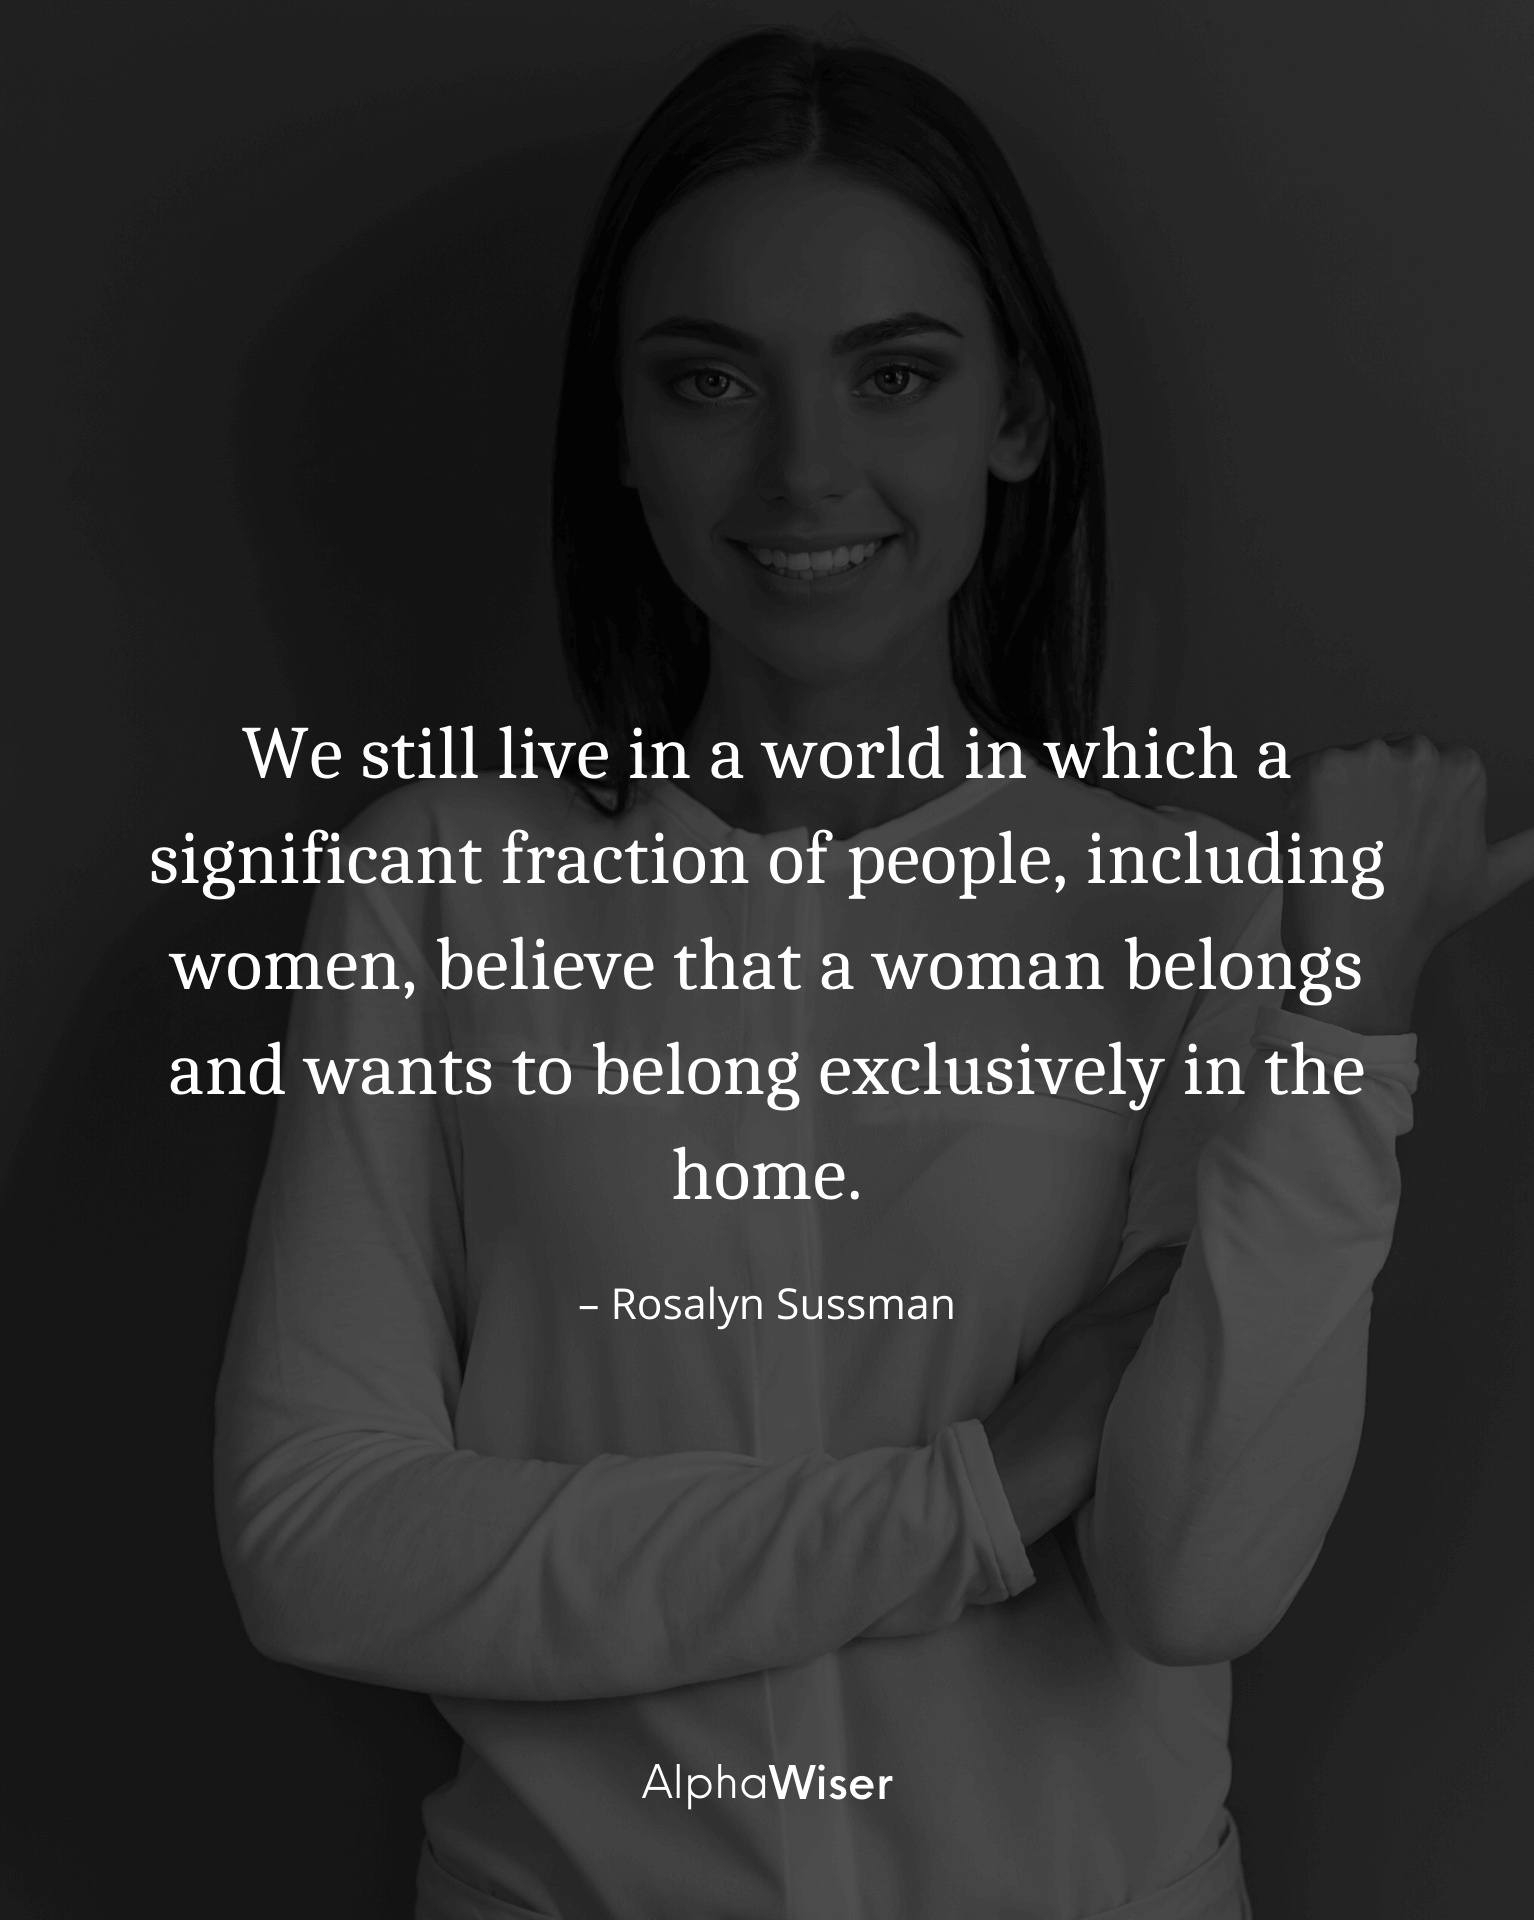 We still live in a world in which a significant fraction of people, including women